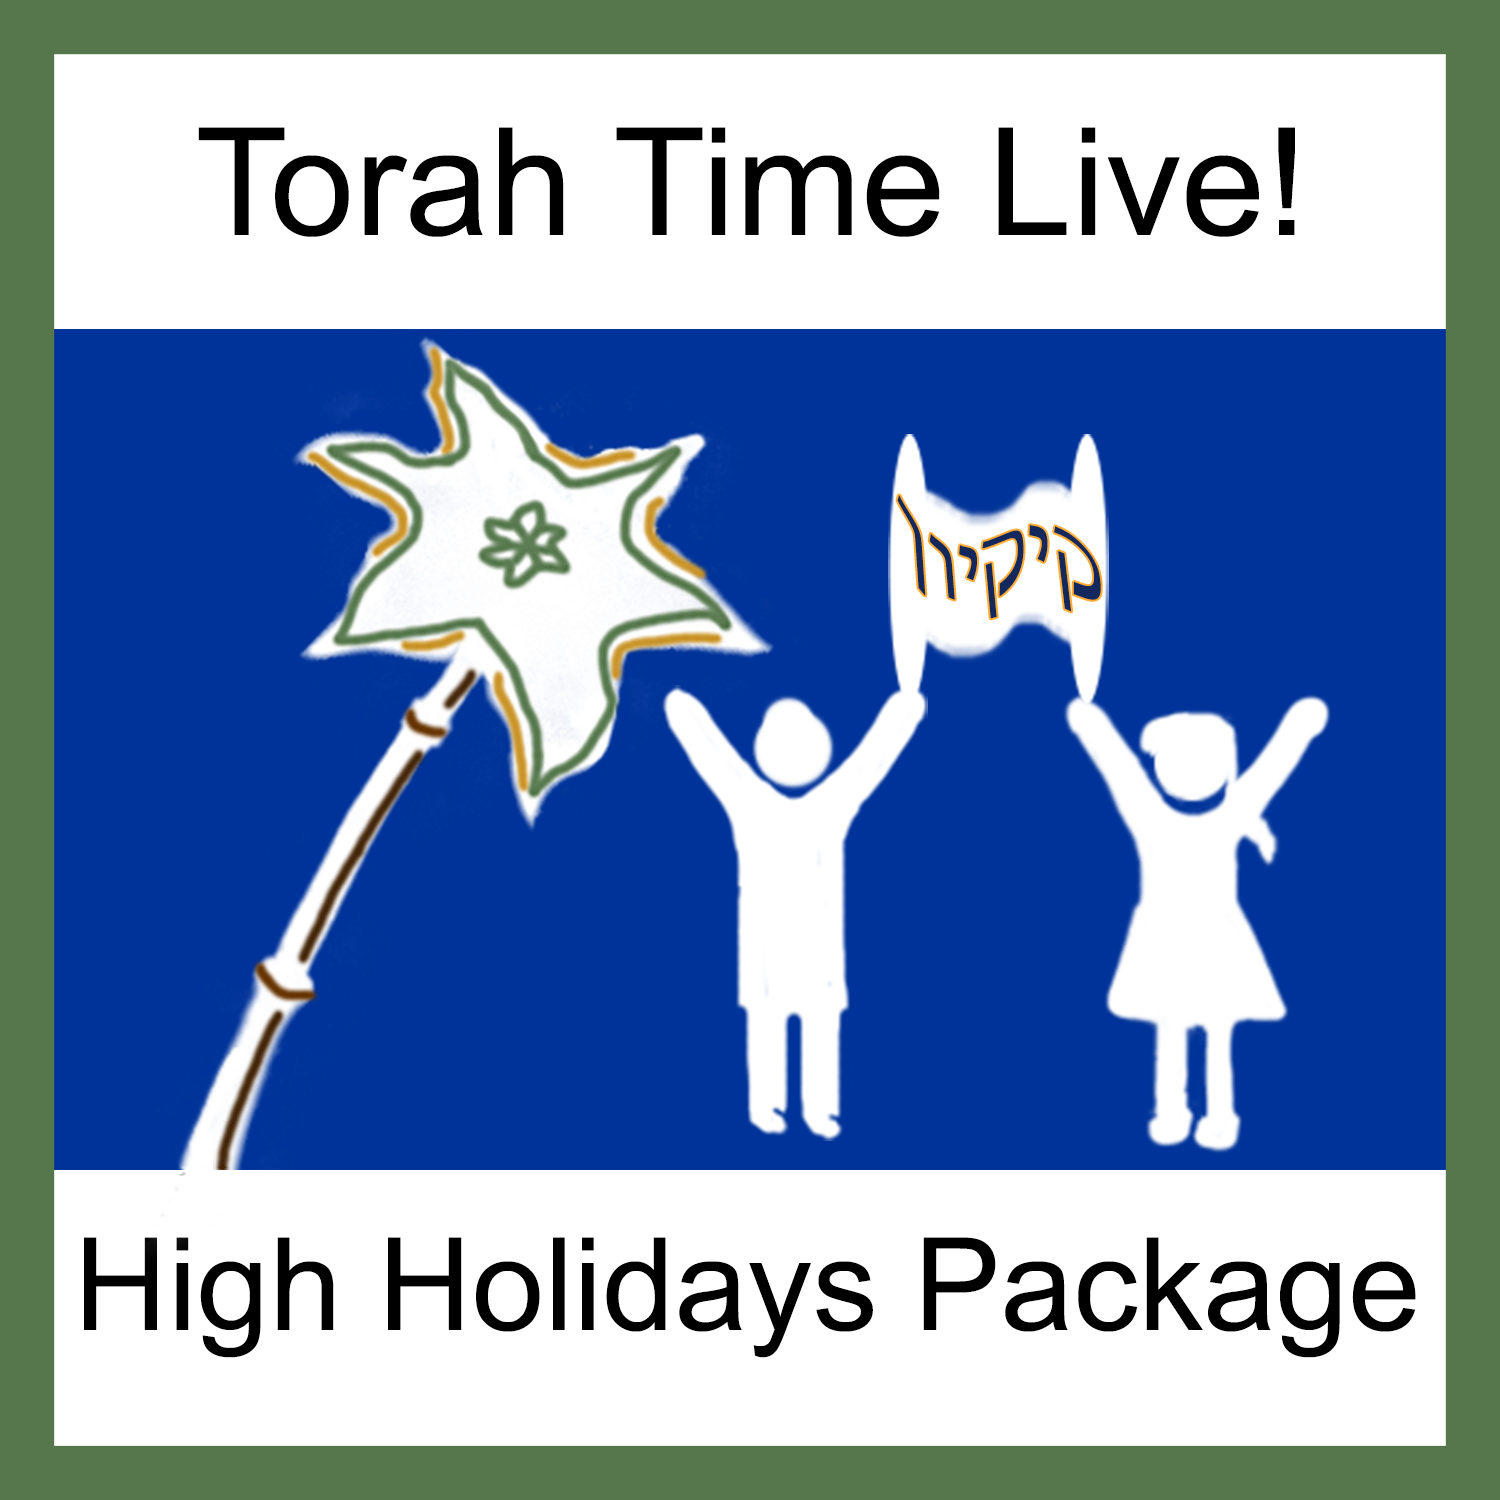 The "Torah Time Live!" High Holidays Package for Grades 4+ [includes RH 1 & 2 + YK]